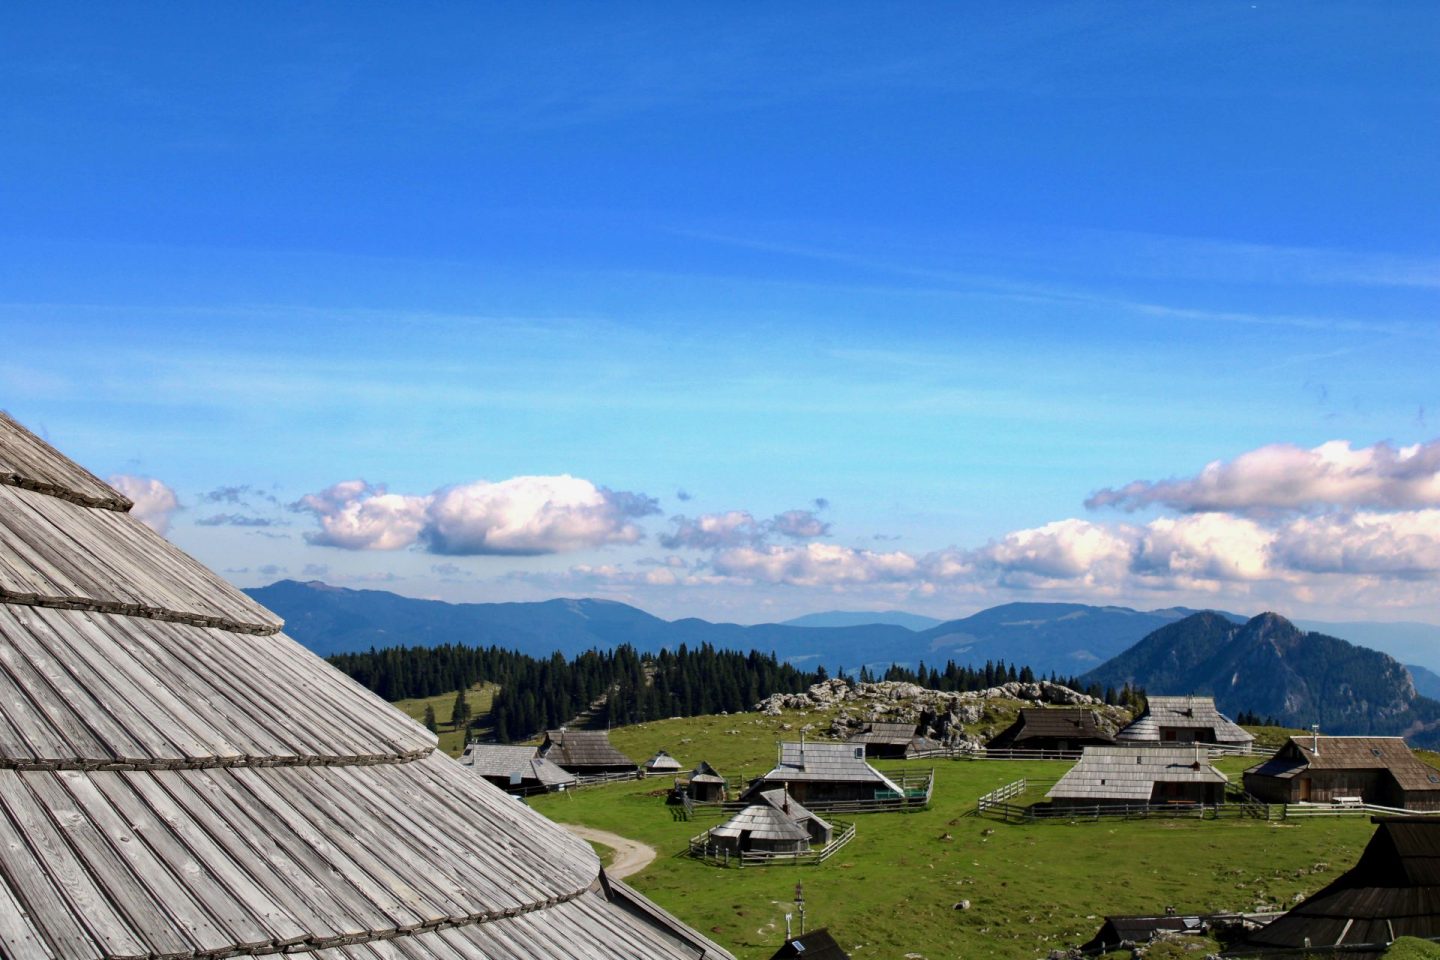 Valika Planina near Kamnik in the Ljubljana region. Image shows herdsman huts on green pasture with mountains in the background.